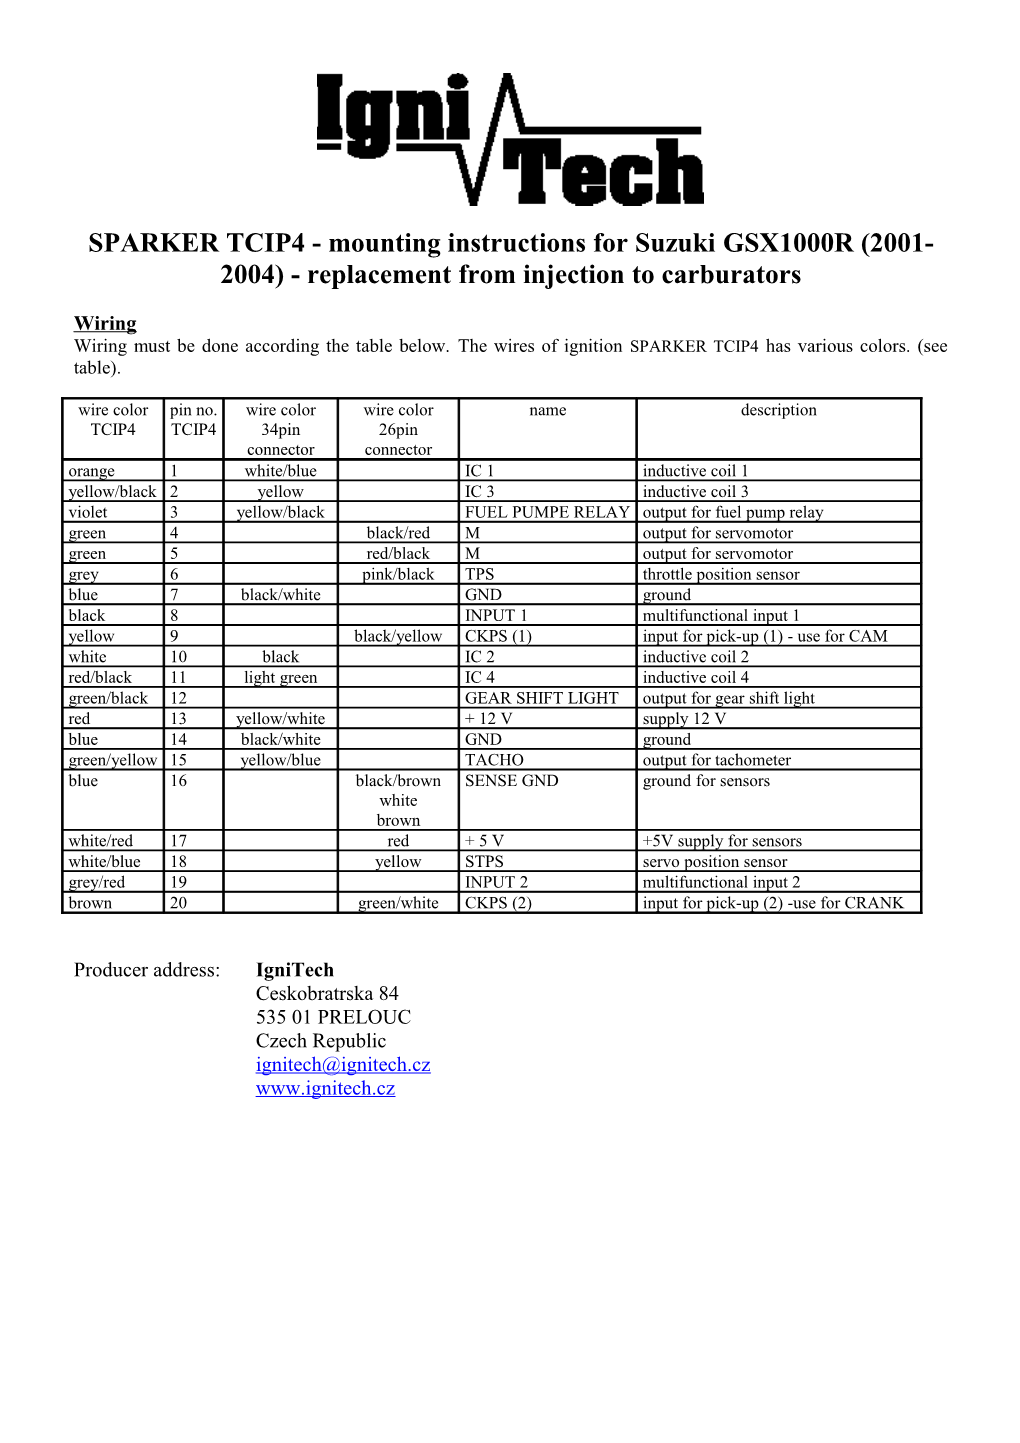 SPARKER TCIP4 - Mounting Instructions for Suzuki GSX1000R (2001-2004) - Replacement From